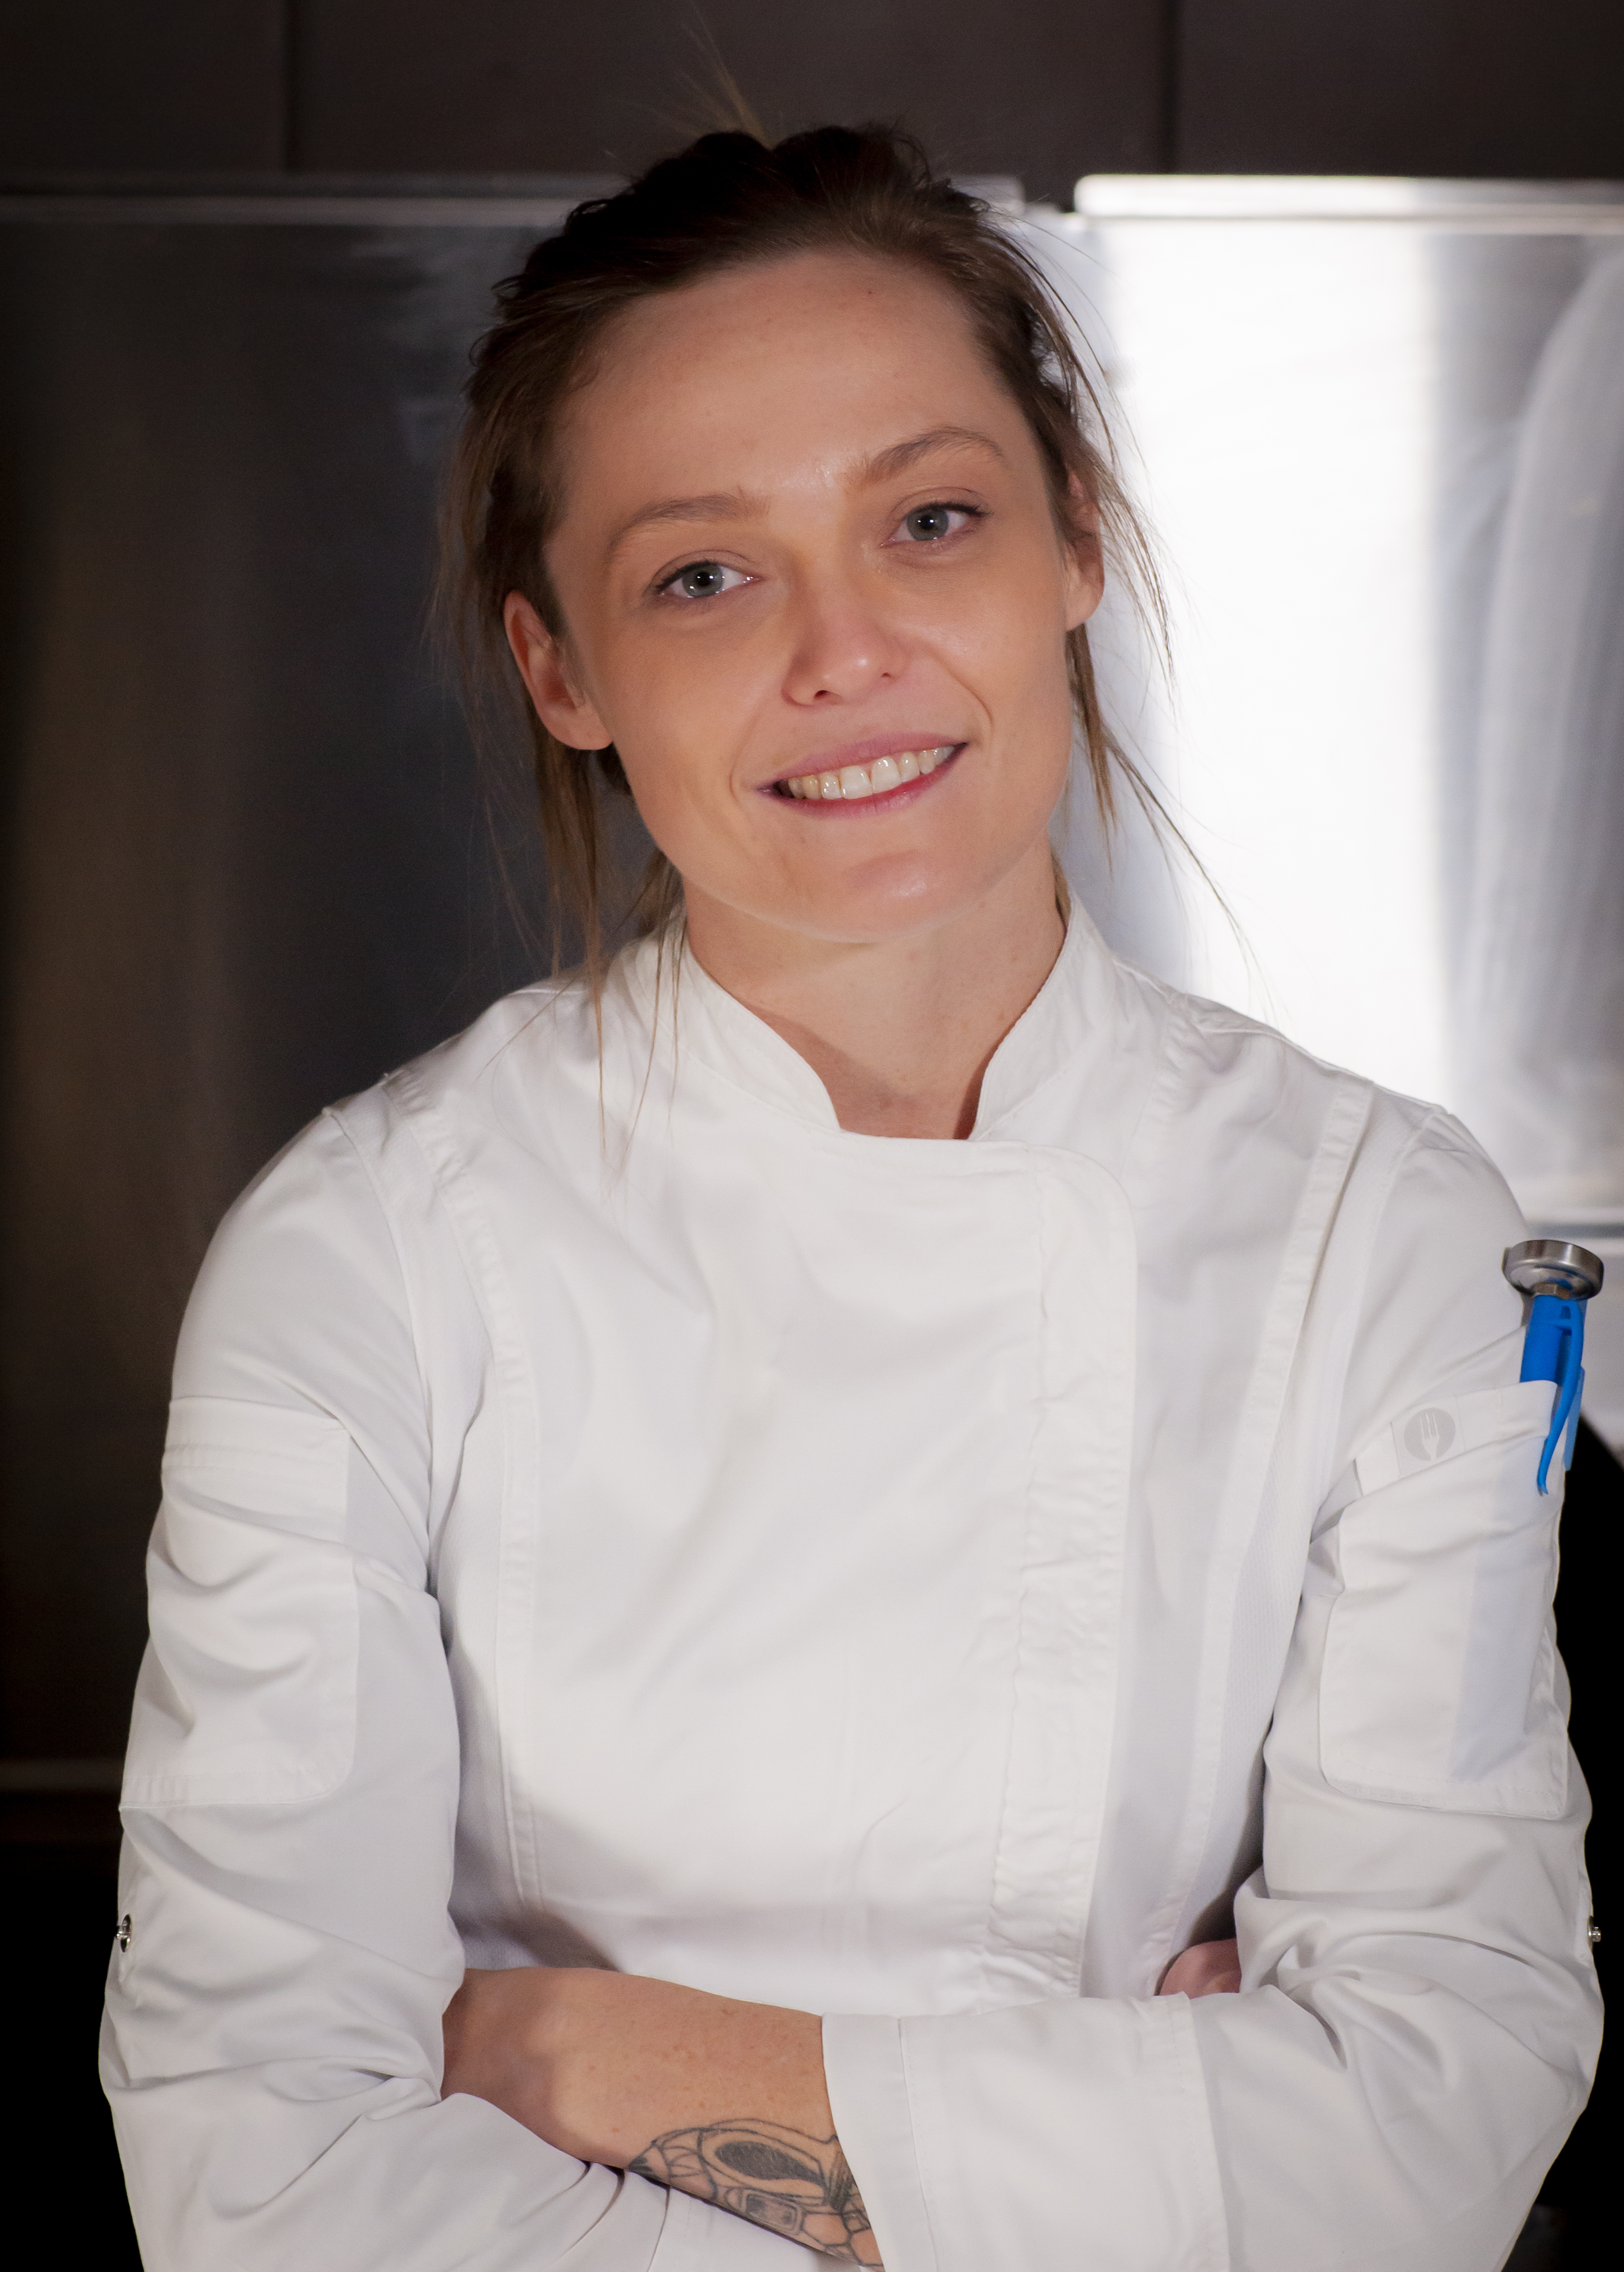 Photo of Kay Miller, a smiling white woman wearing a chef's jacket